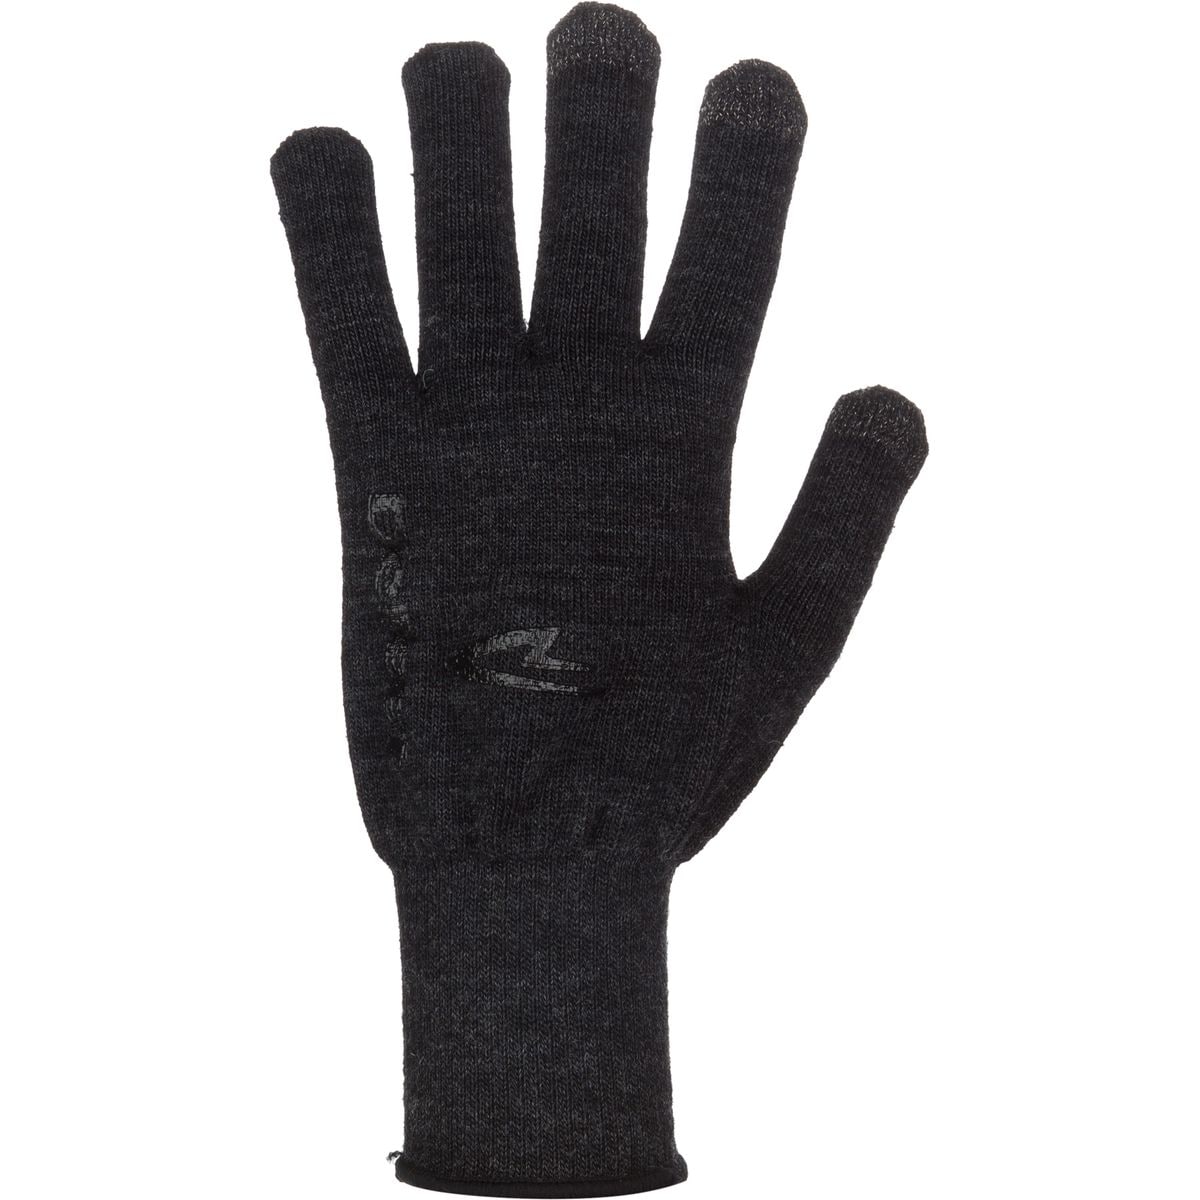 DeFeet Wool Electronic Touch Glove Mens